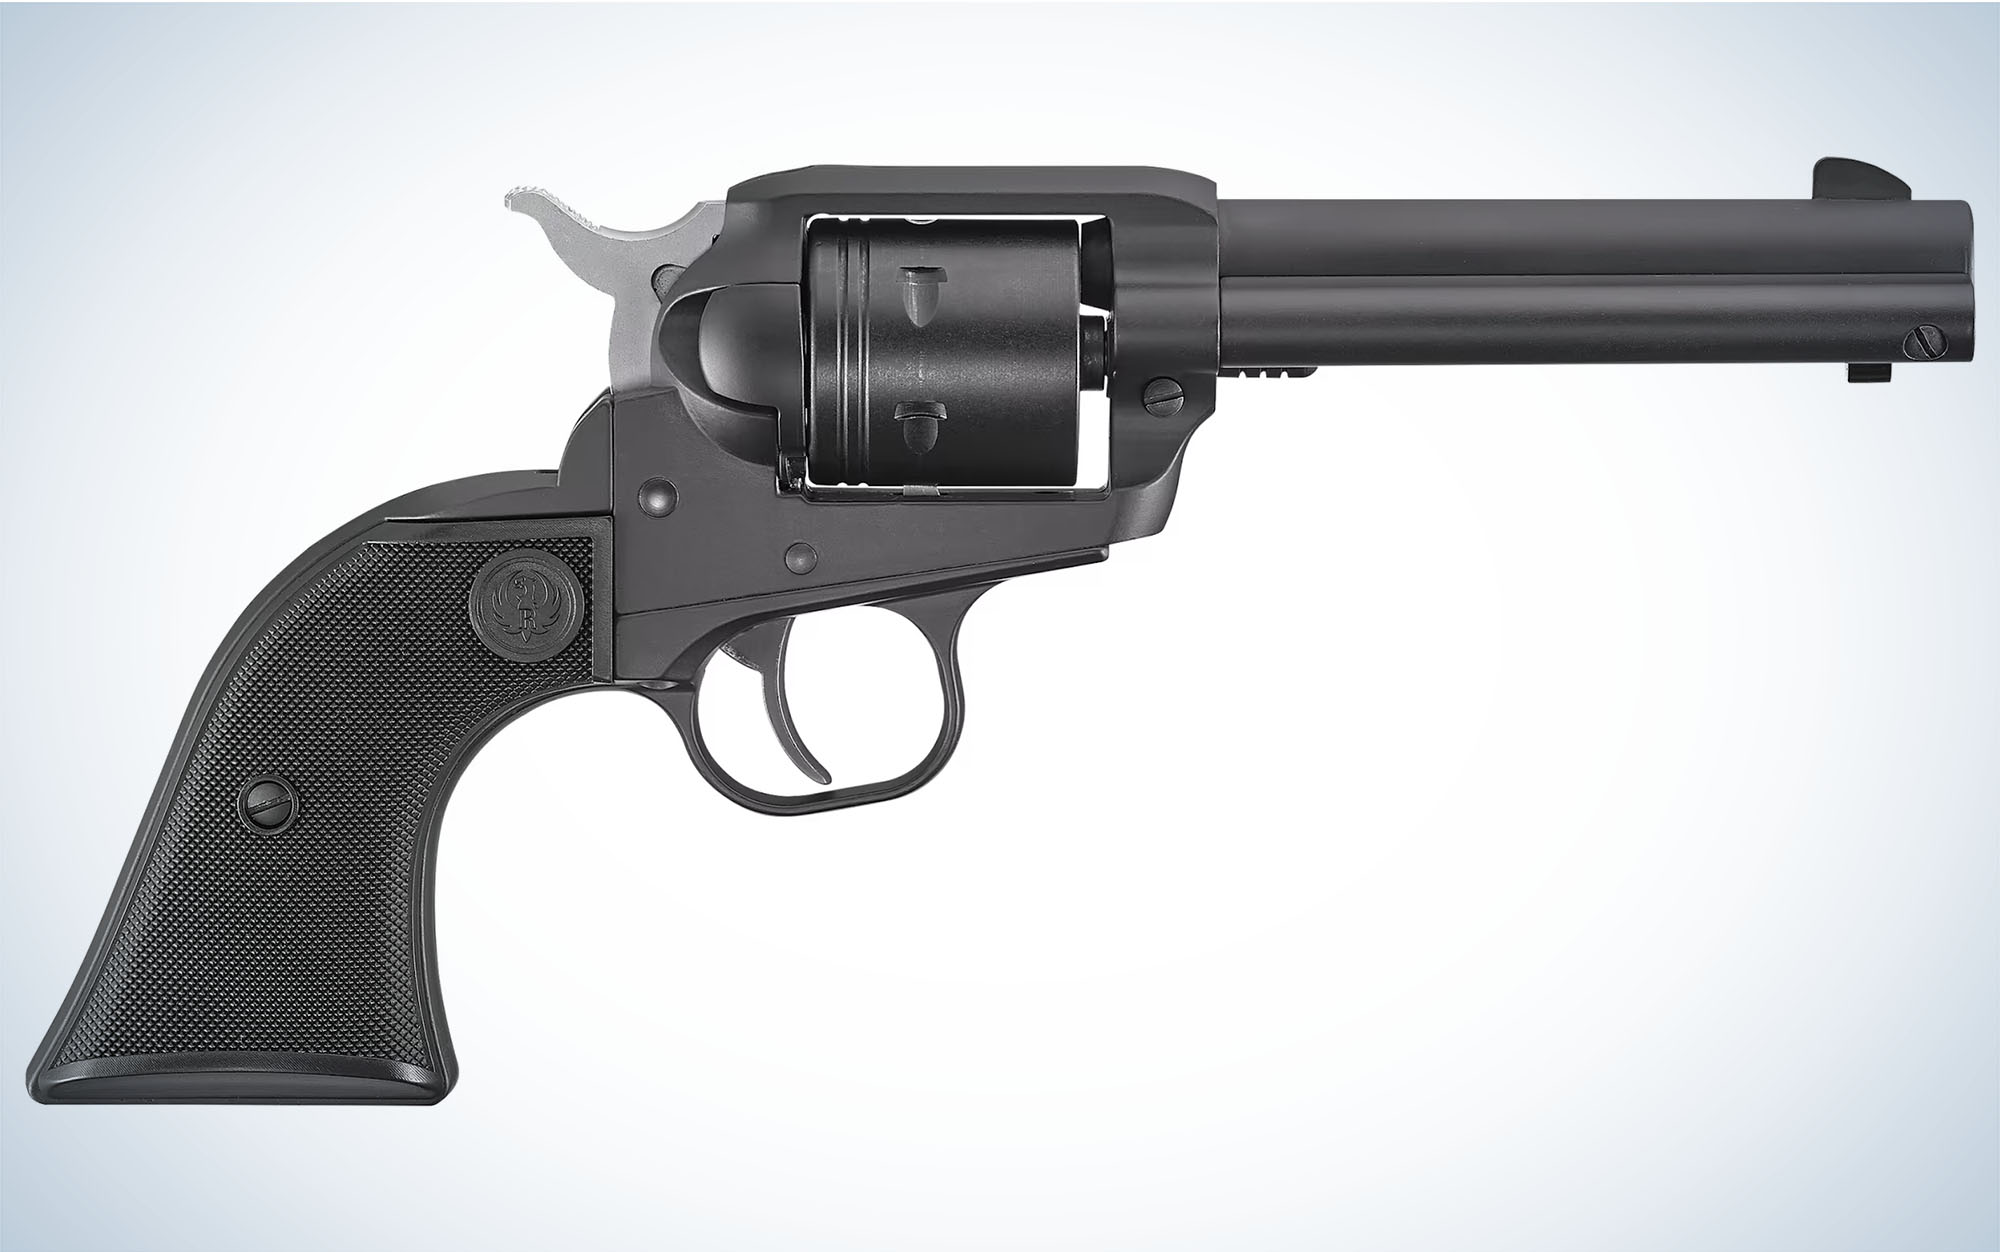 The Ruger Wrangler is one of the best .22 pistols.